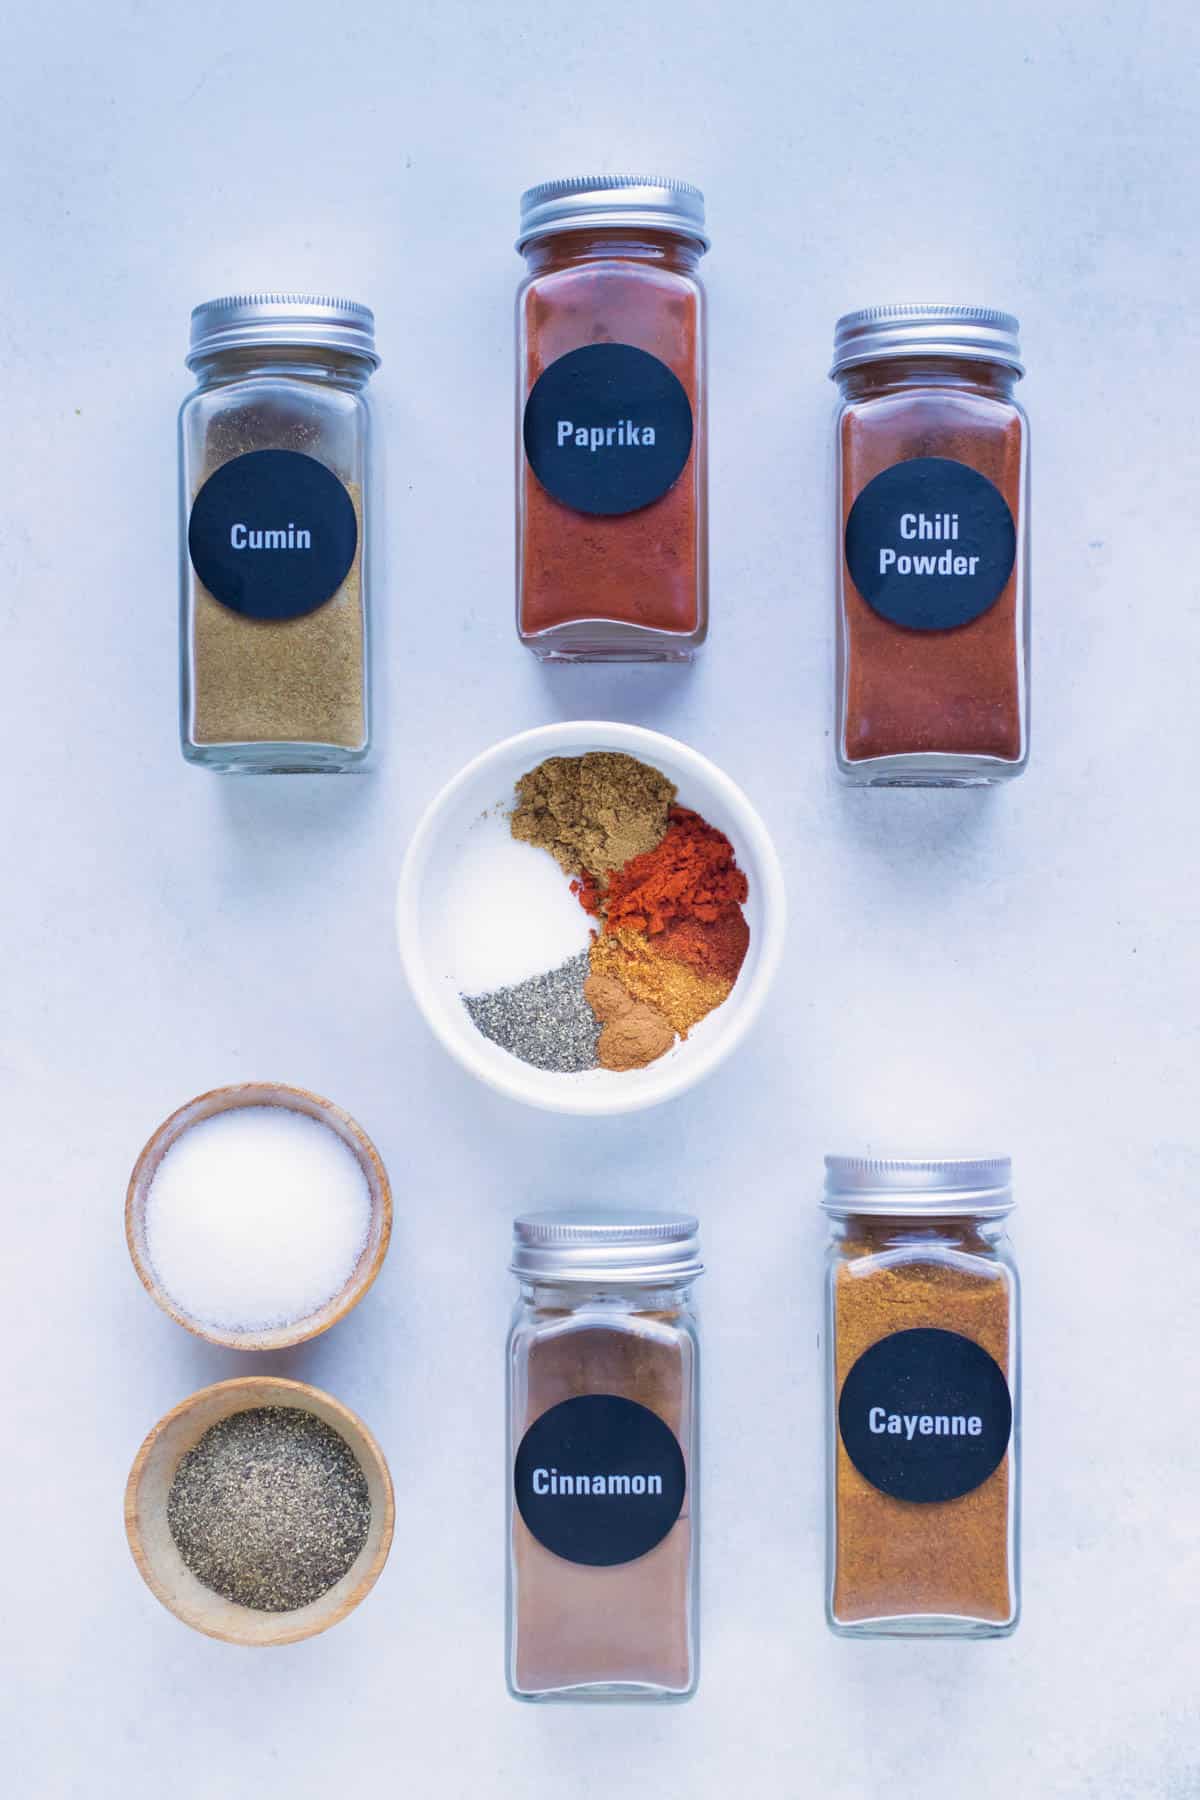 Cumin, paprika, chili powder, cayenne pepper, and cinnamon are the spices used in this recipe.